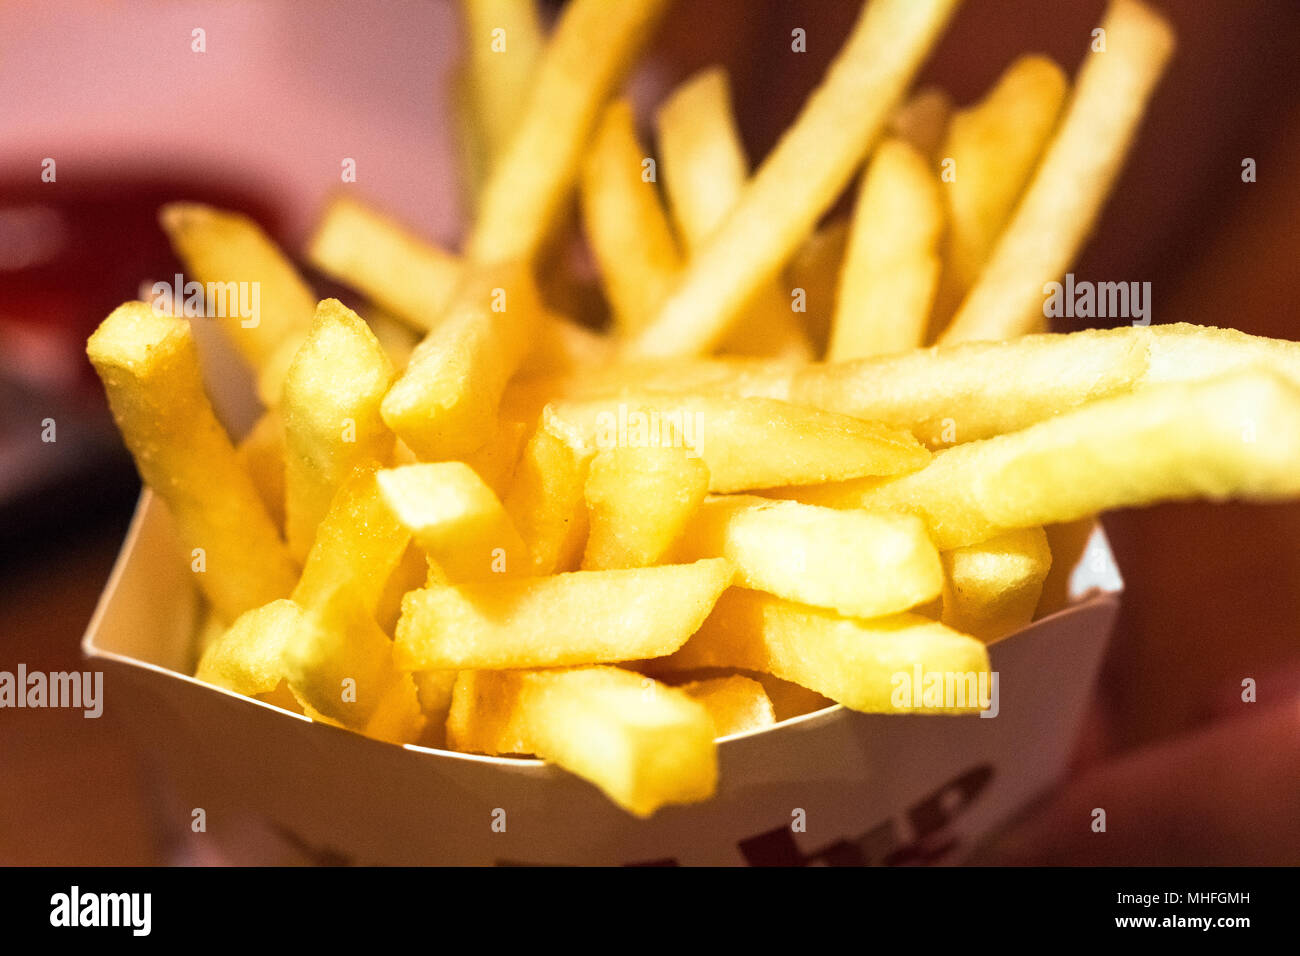 French fries in white box. Cost up Stock Photo